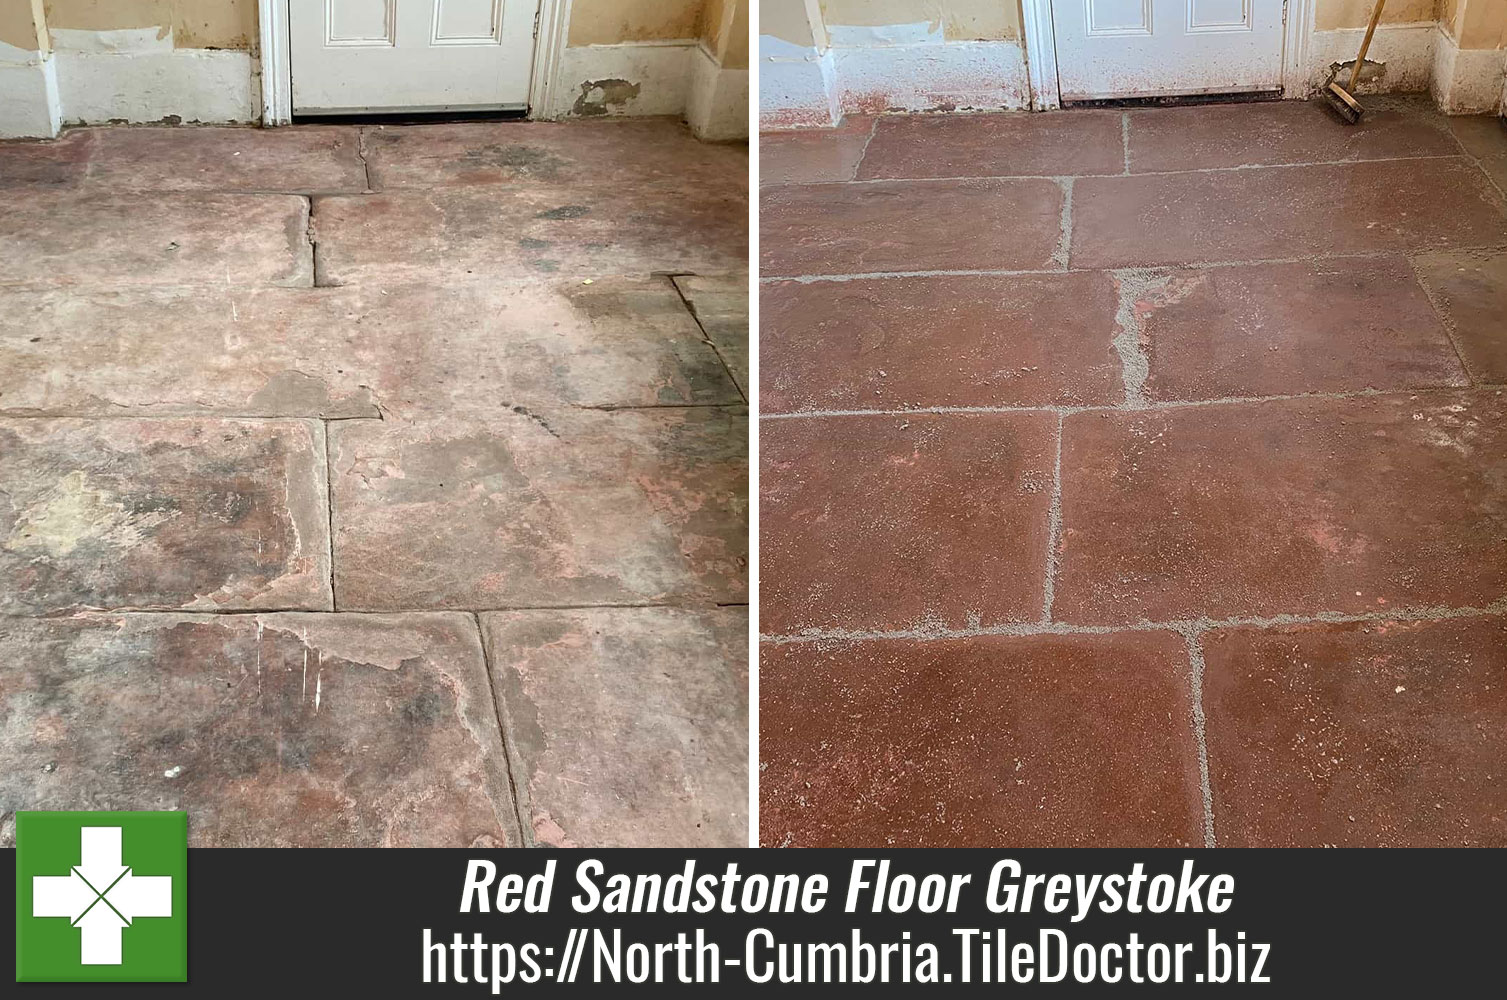 Adding another 200 Years of a Life to a Stone Floor in Greystoke Cumbria with Tile Doctor Milling Pads